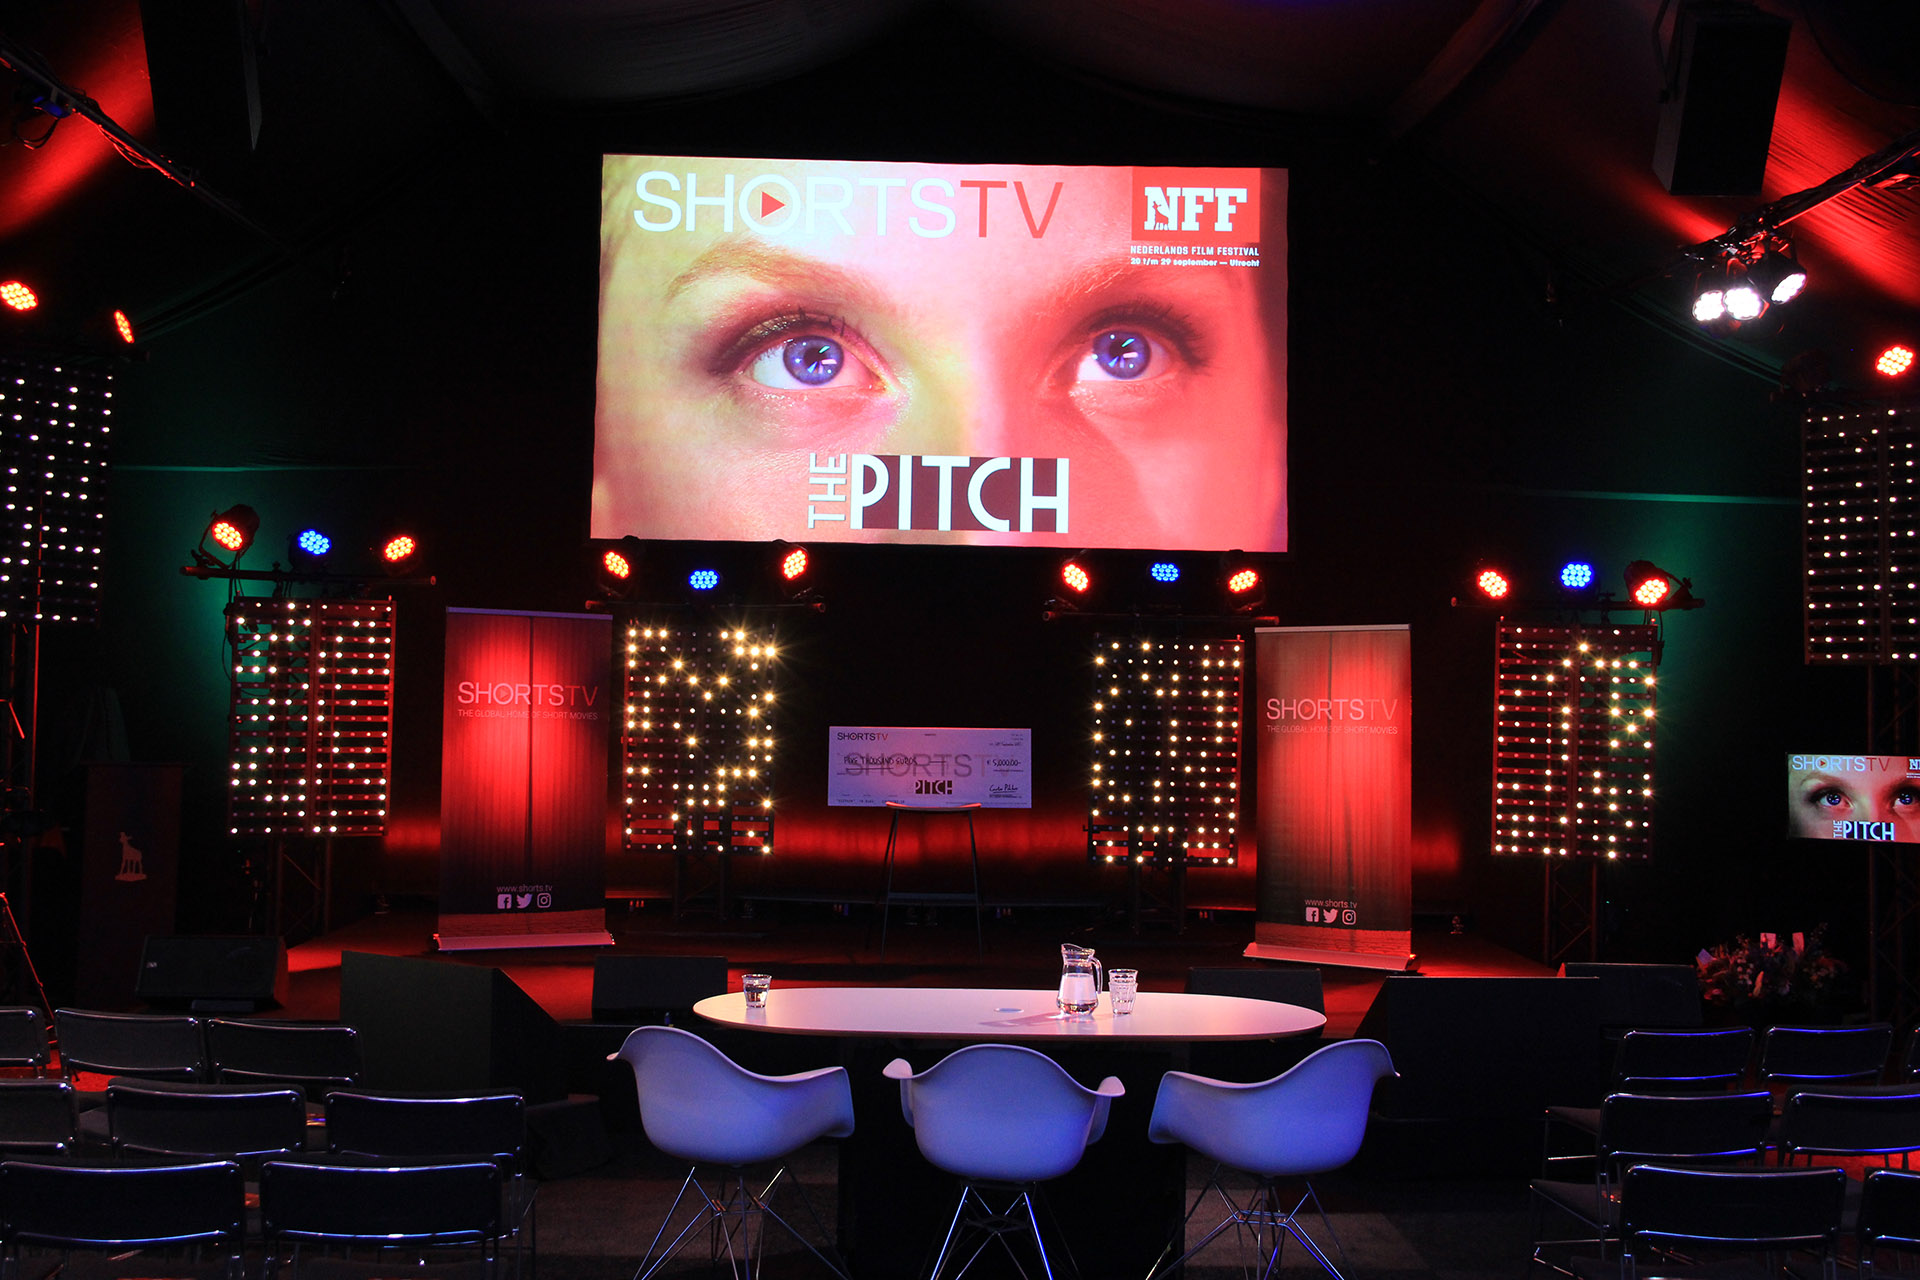 The Pitch stage at the Netherlands Film Festival